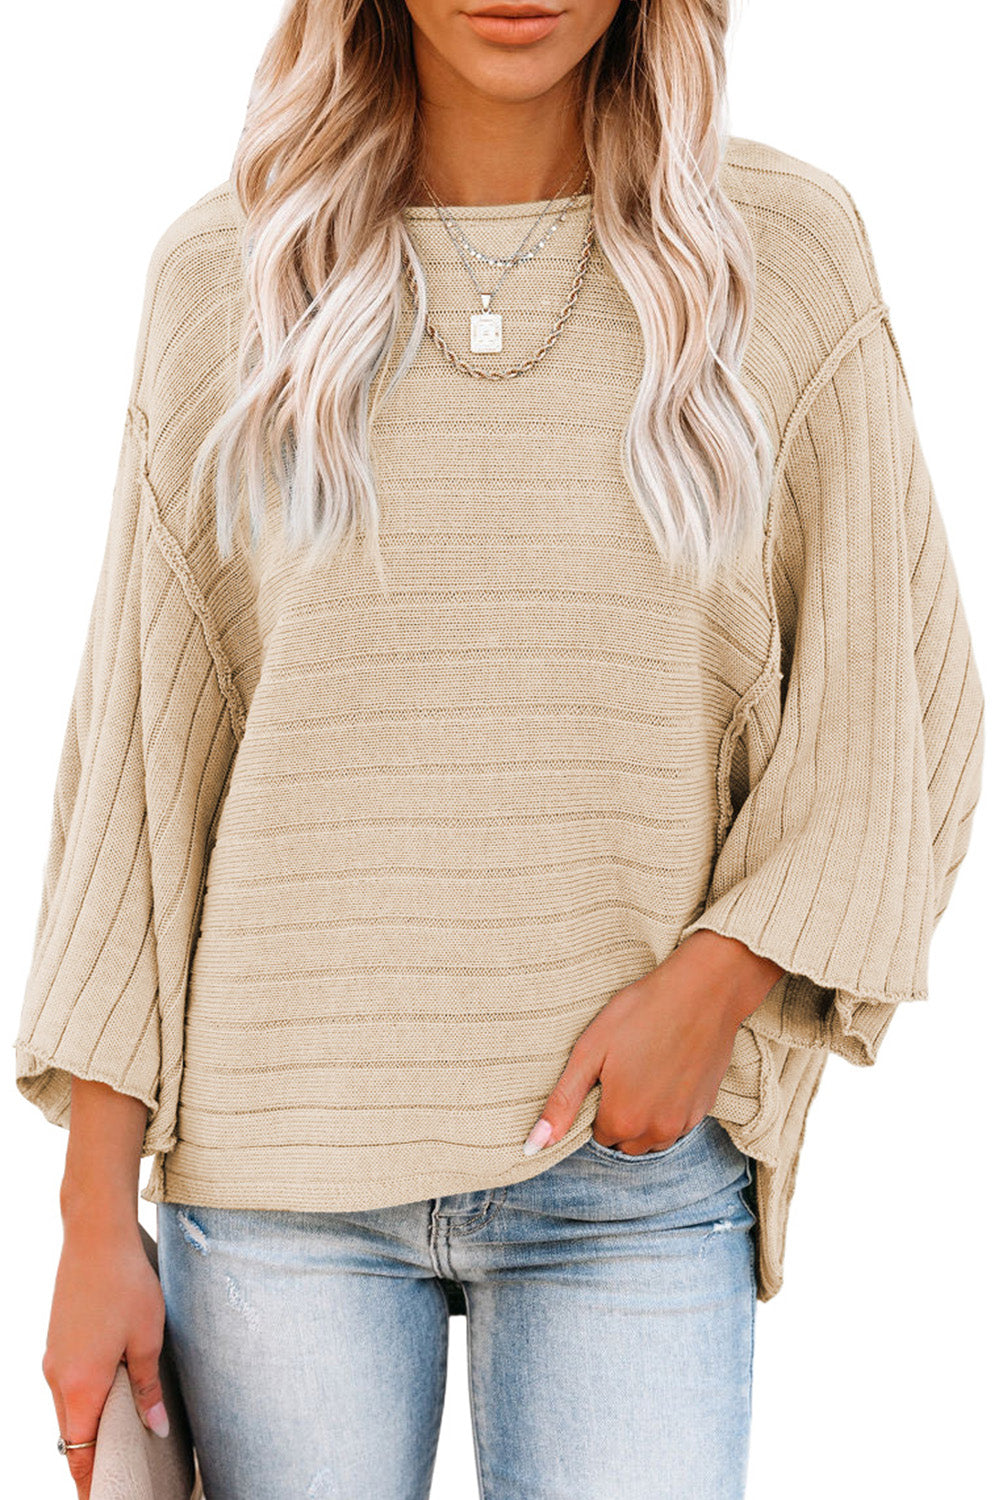 Apricot Ribbed Knit Dolman Top Pre Order Sweaters & Cardigans JT's Designer Fashion